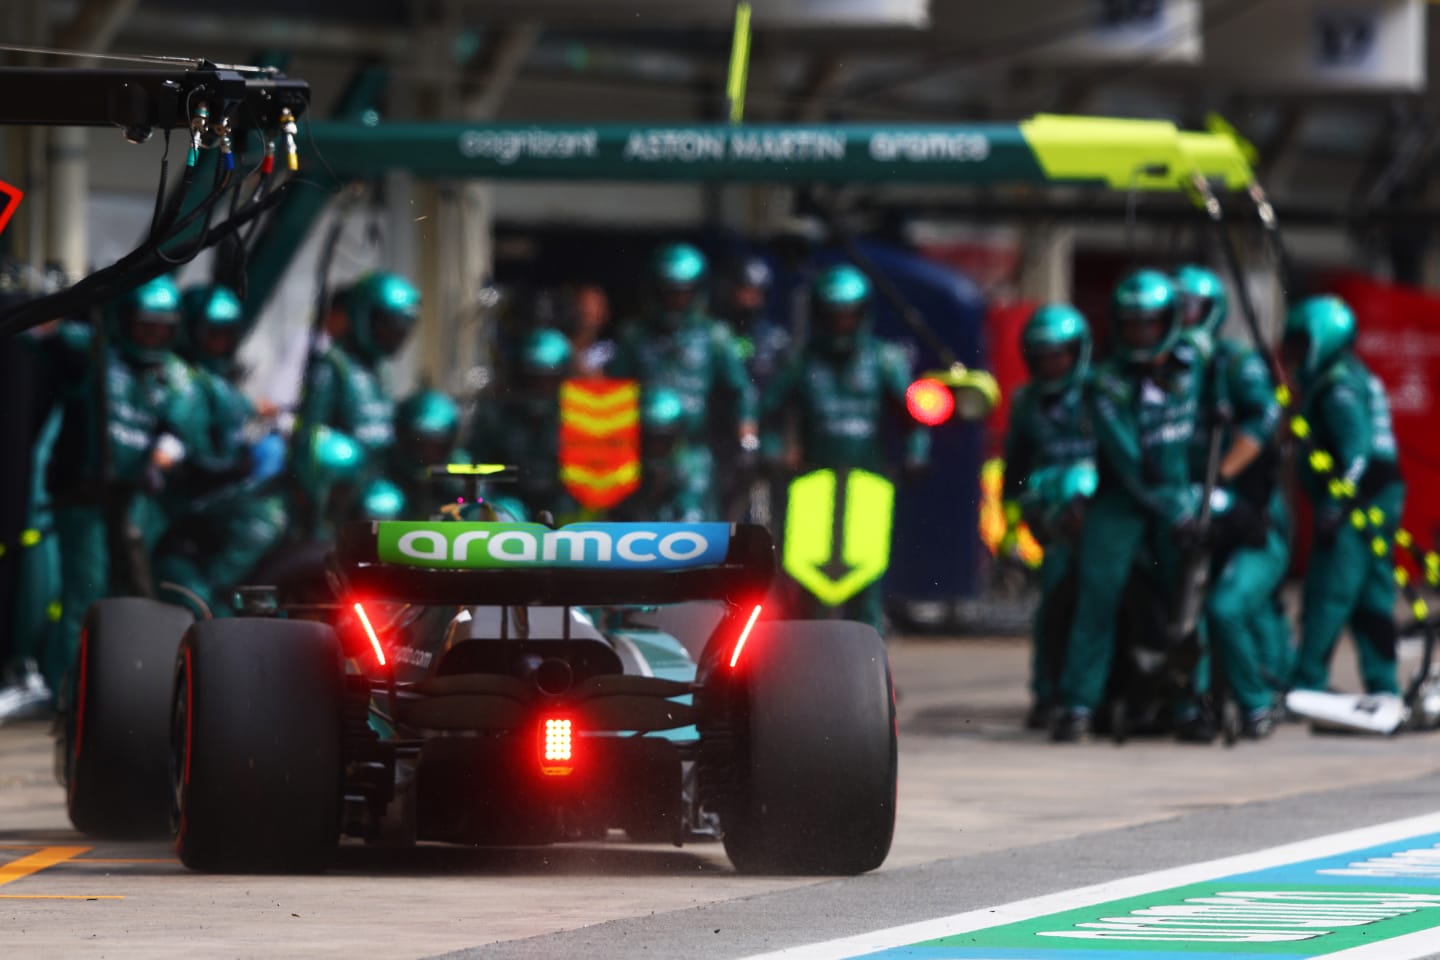 SAO PAULO, BRAZIL - NOVEMBER 13: Sebastian Vettel of Germany driving the (5) Aston Martin AMR22 Mercedes makes a pitstop during the F1 Grand Prix of Brazil at Autodromo Jose Carlos Pace on November 13, 2022 in Sao Paulo, Brazil. (Photo by Mark Thompson/Getty Images)